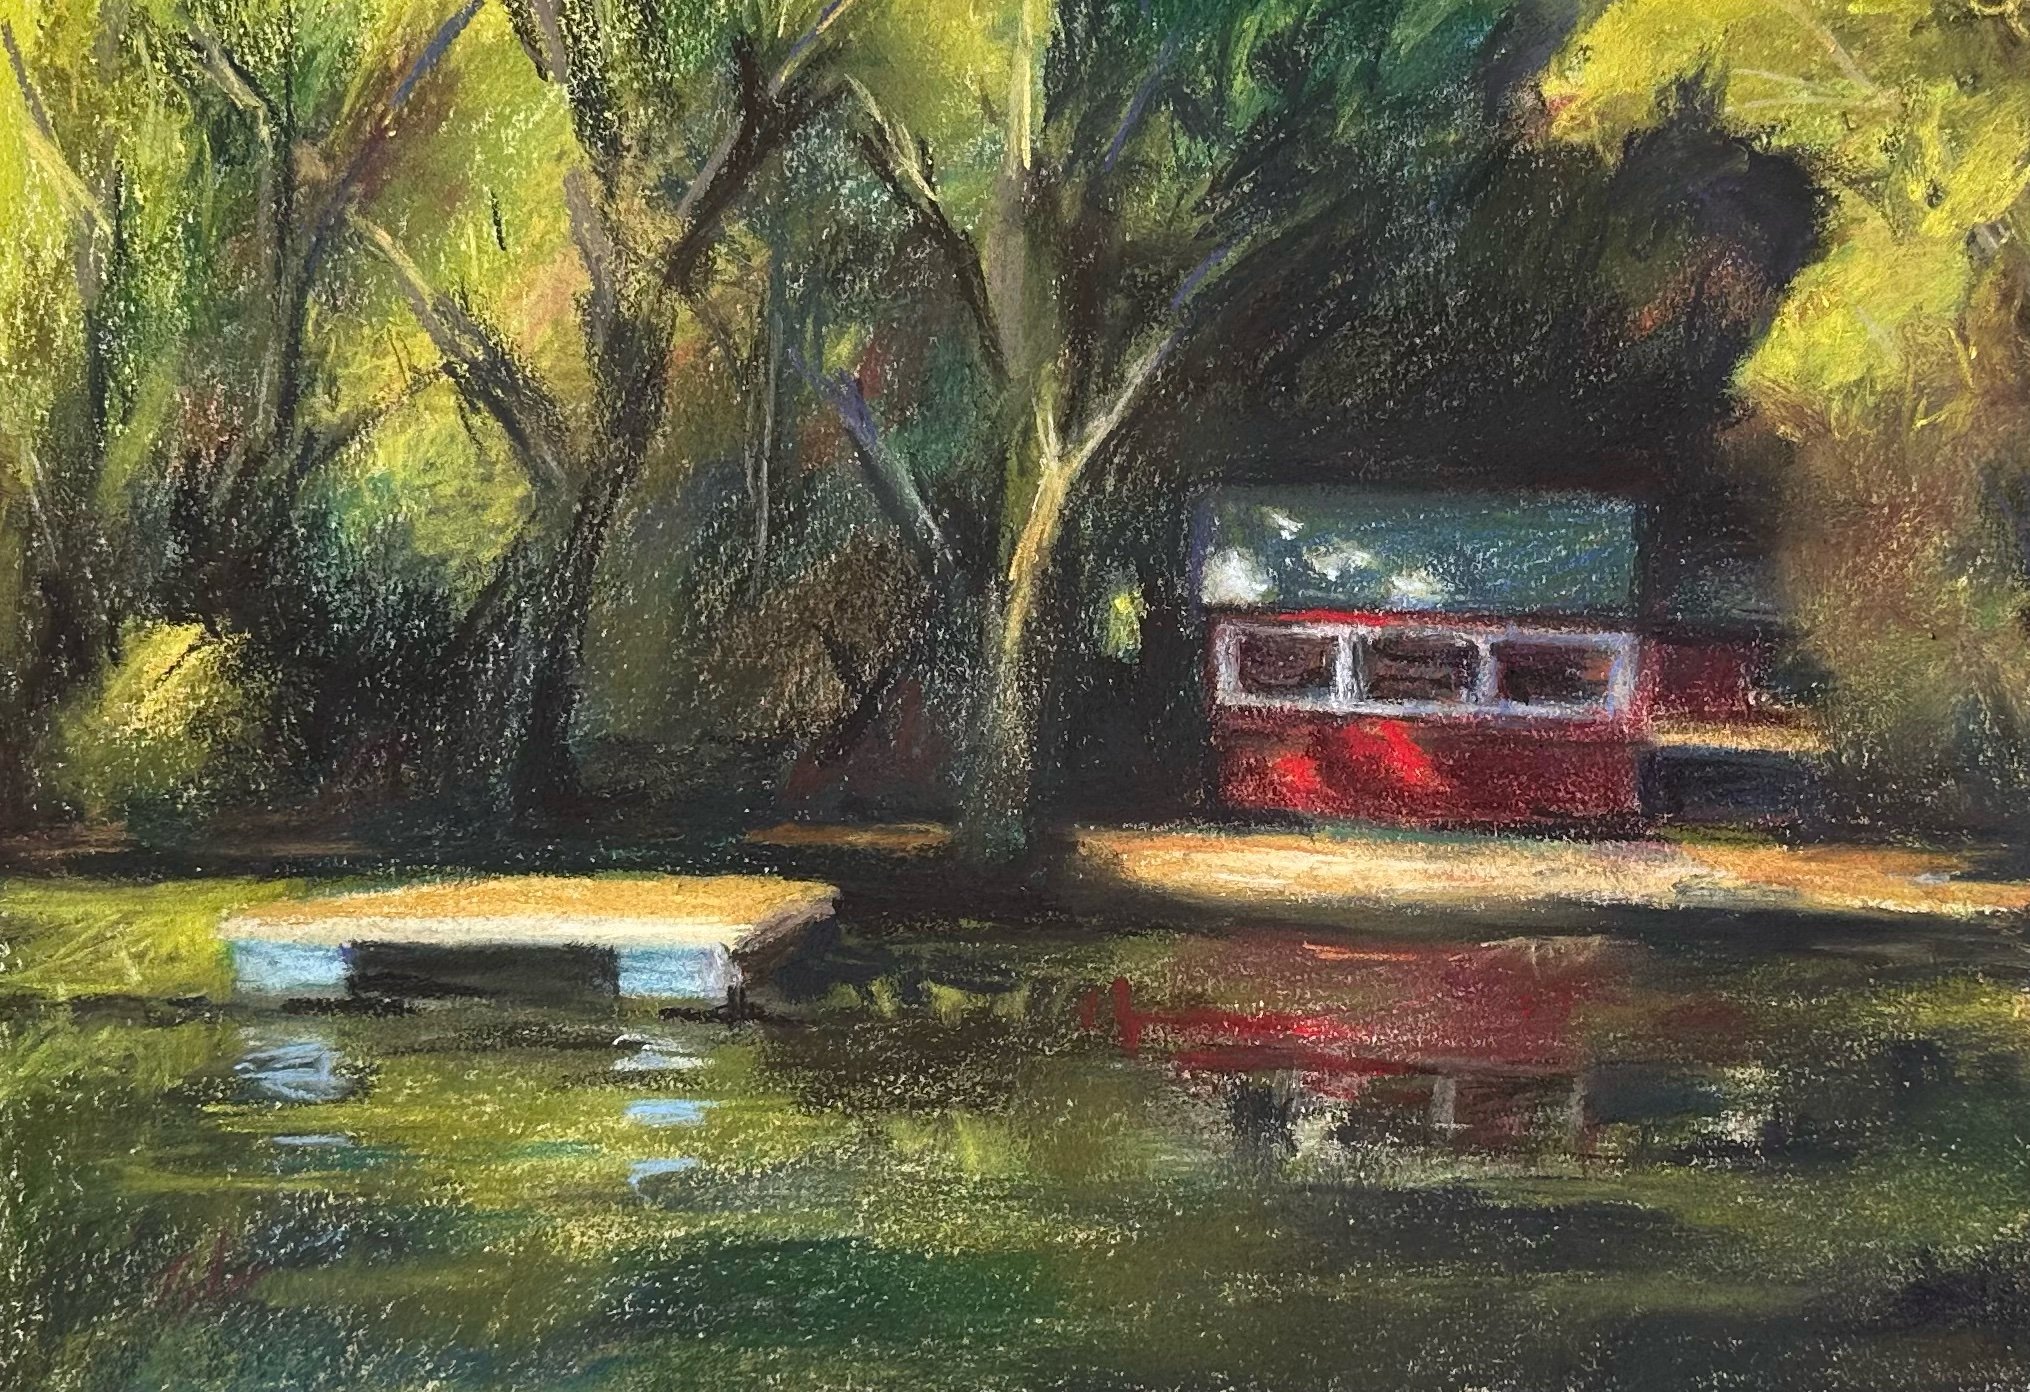  “Camp”    pastel on Canson paper    11” x 14”    private collection 